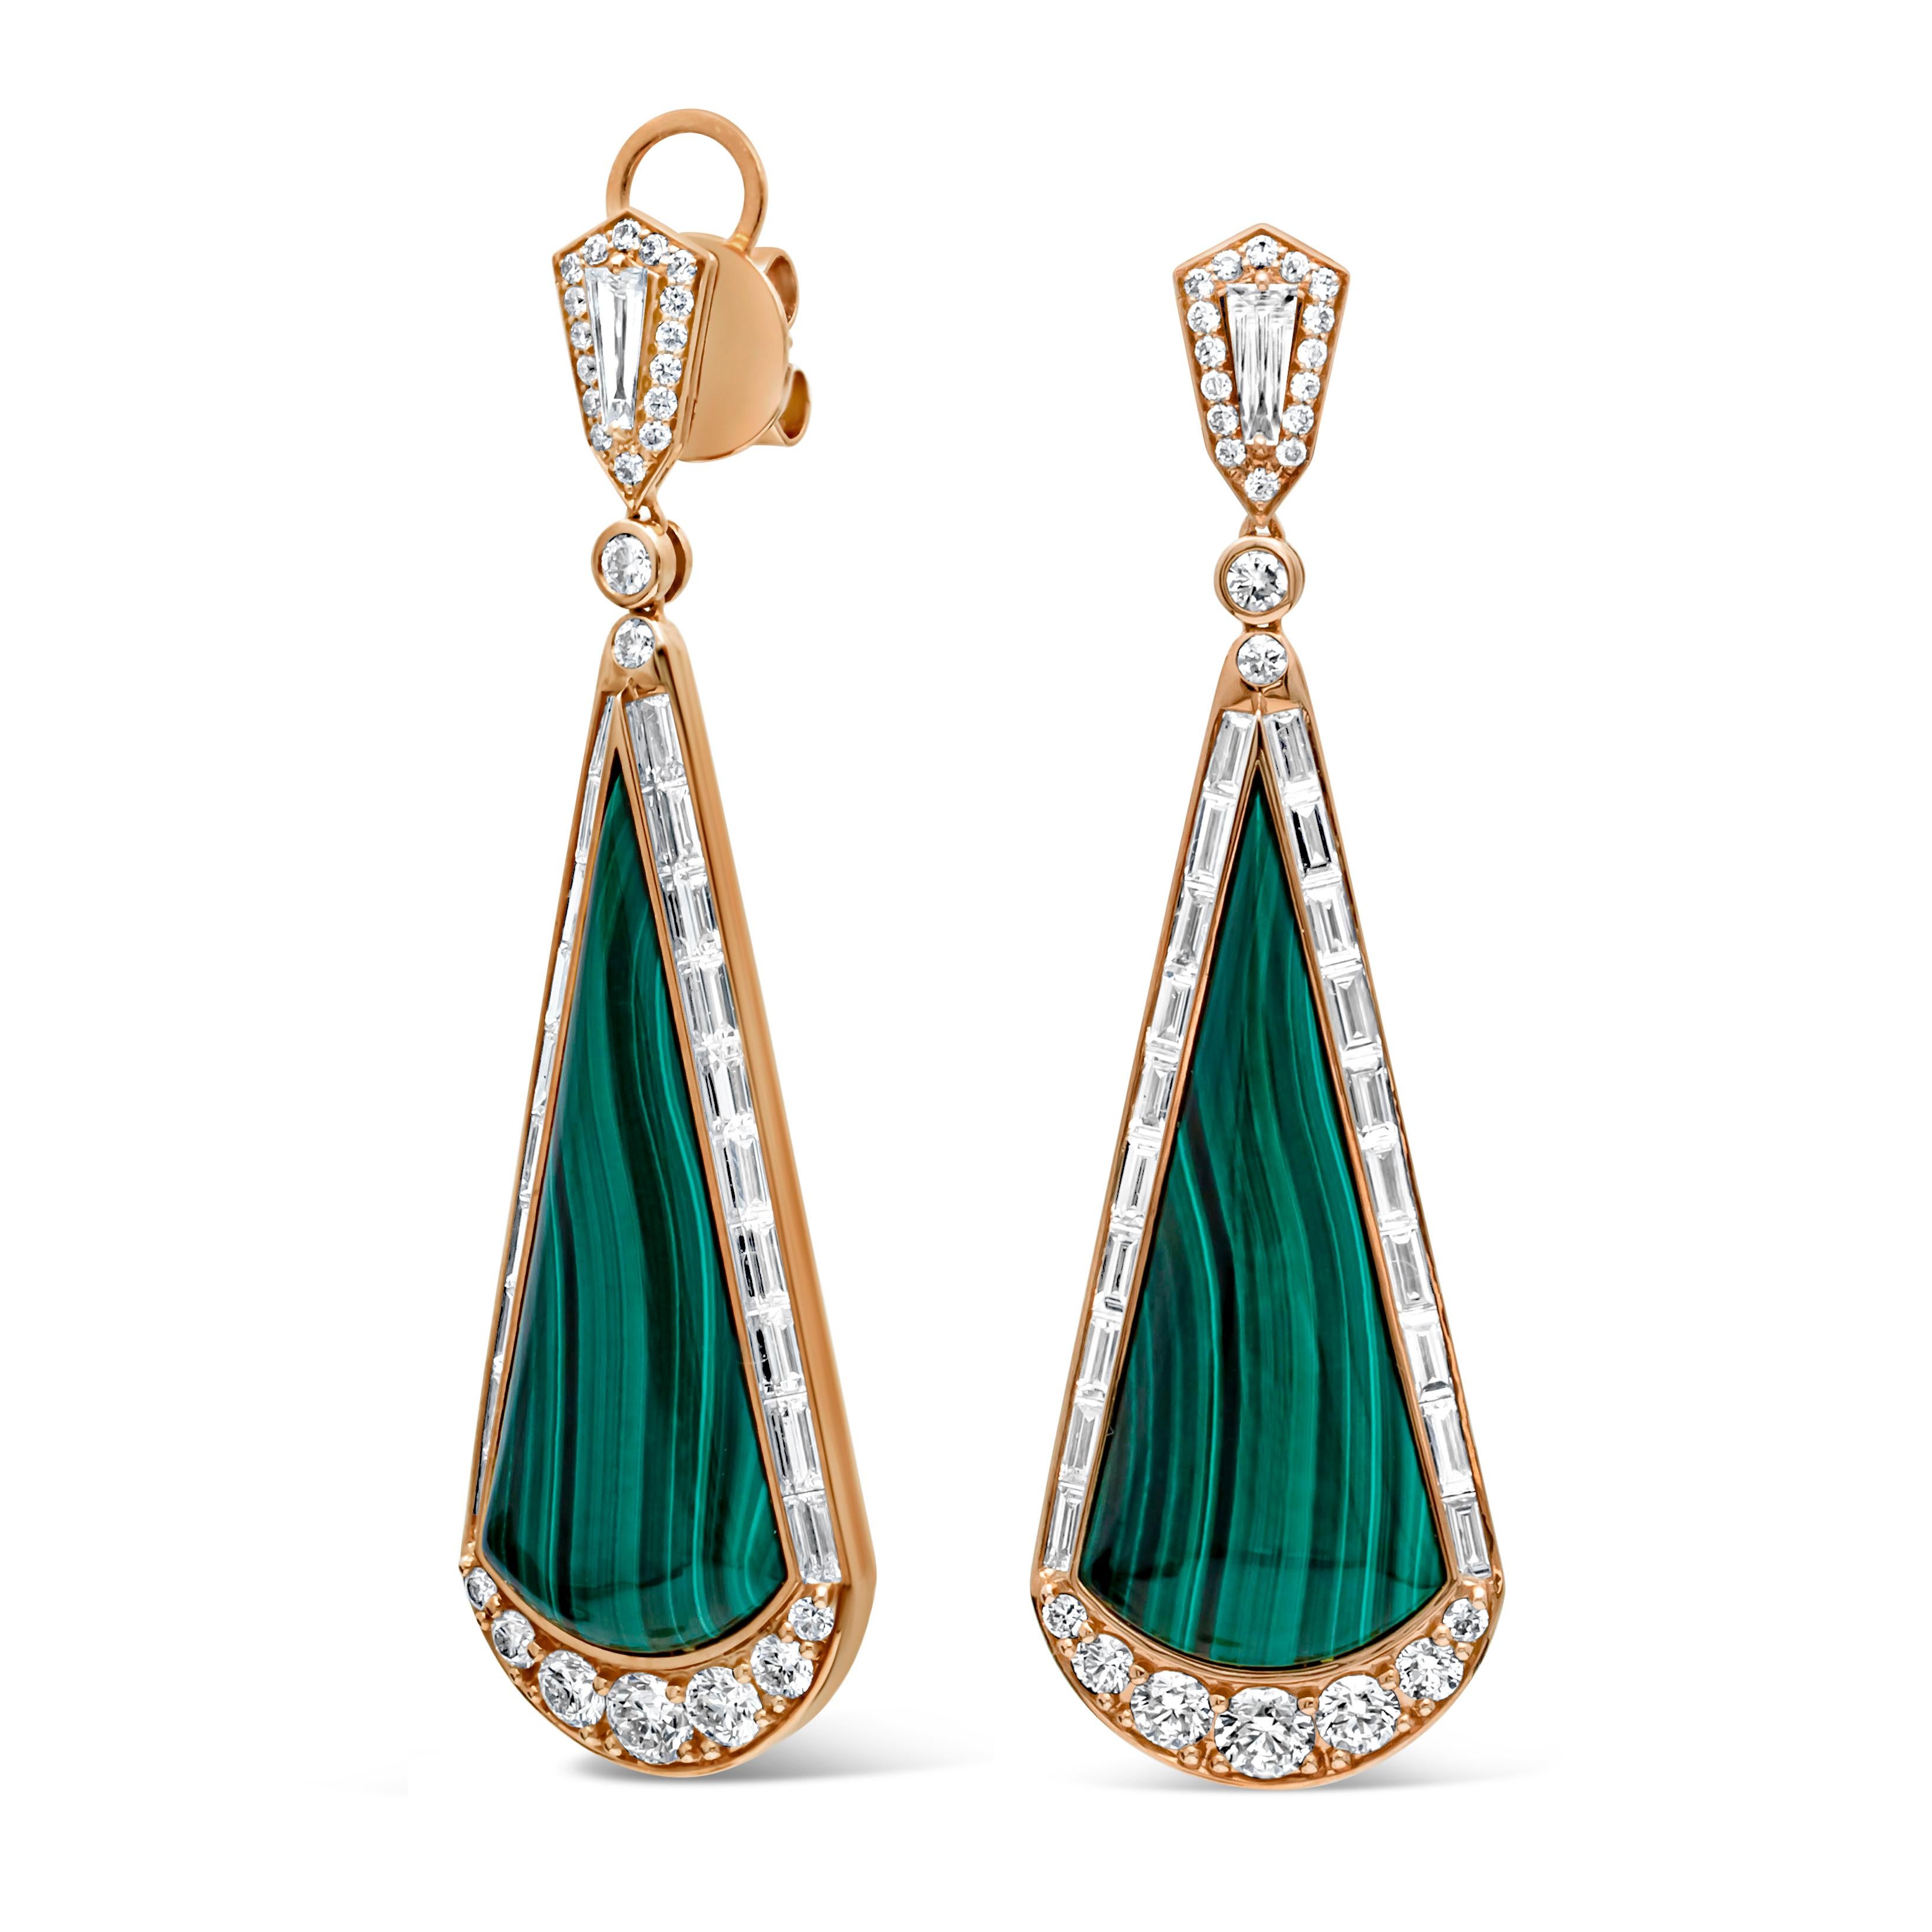 Showcasing a beautiful and fashionable dangle earrings set with color-rich brilliant trapezoid cut malachite weighing 25.30 carats total, surrounded by brilliant round and baguette cut diamonds in a timeless channel setting. Suspended on a diamond